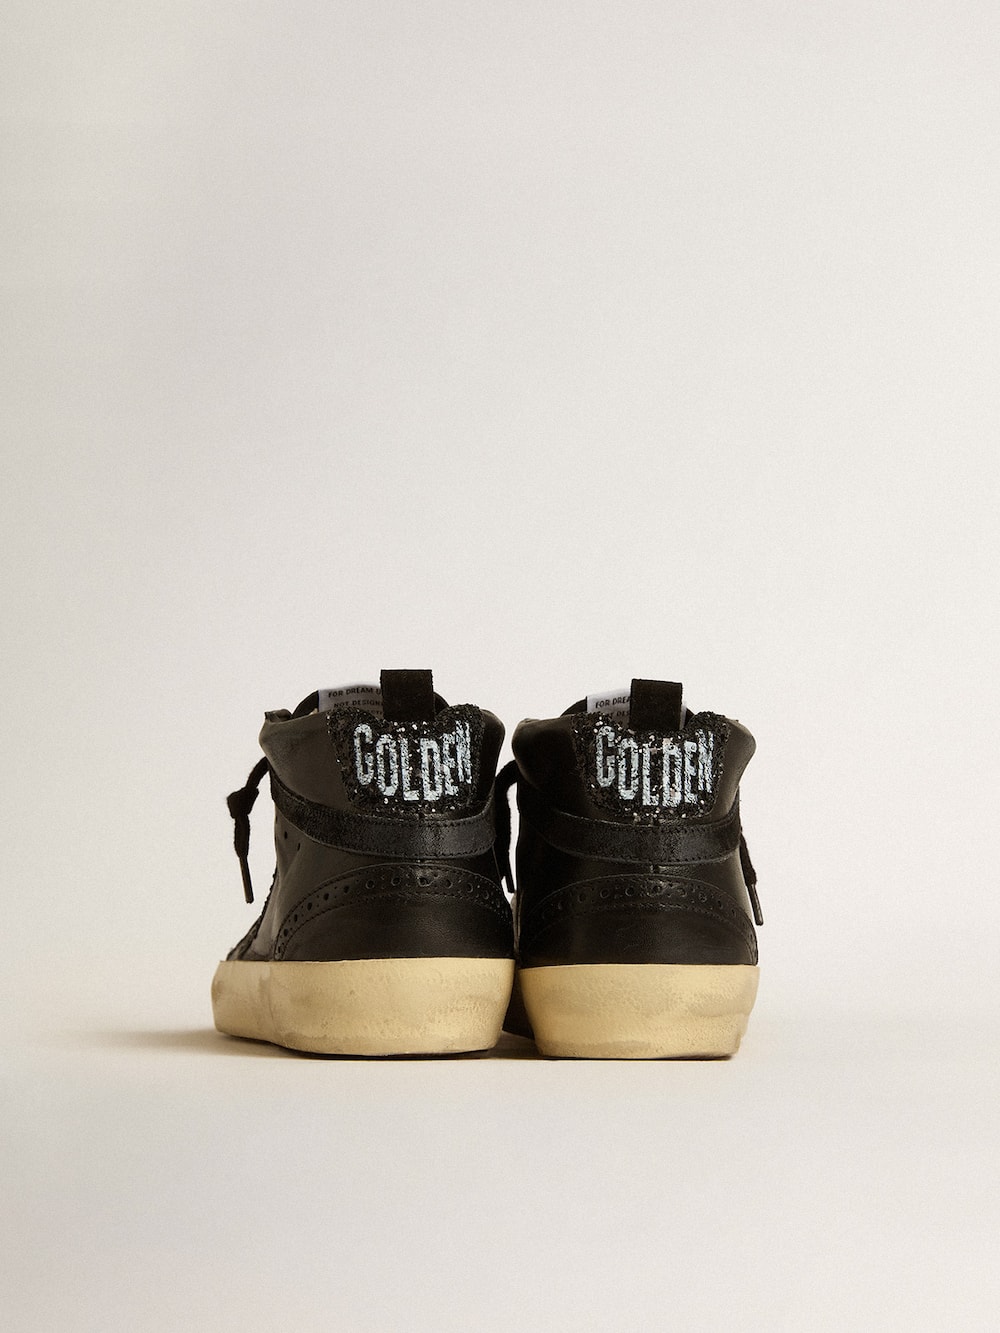 Golden Goose - Women's Mid Star in black nappa with black glitter star and suede flash in 